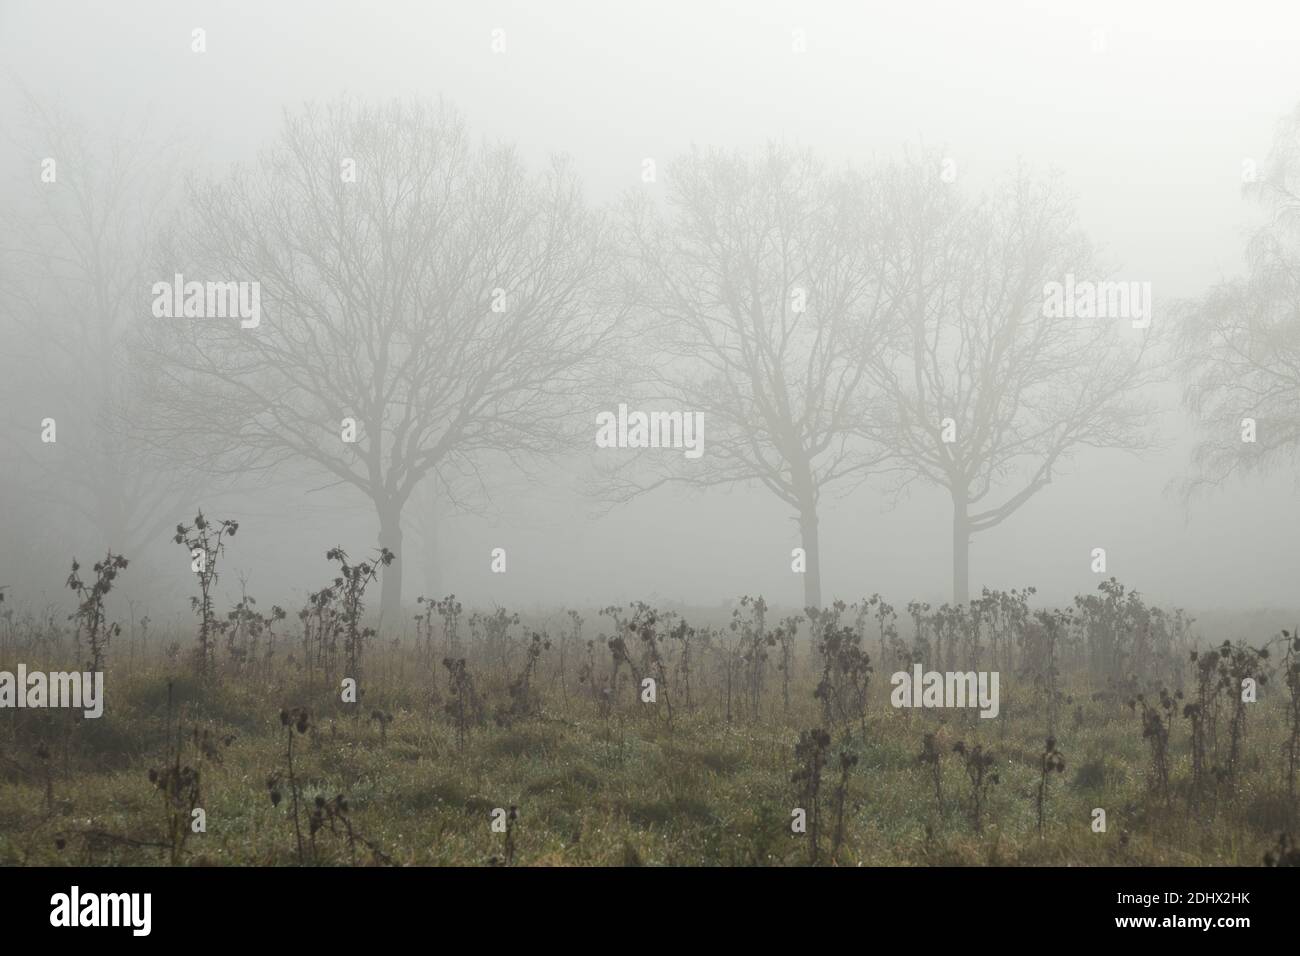 Ghostly trees in mist and fog in distance distance with foreground dead undergrowth in meadow against a white sky feeling lost and without hope. High Stock Photo